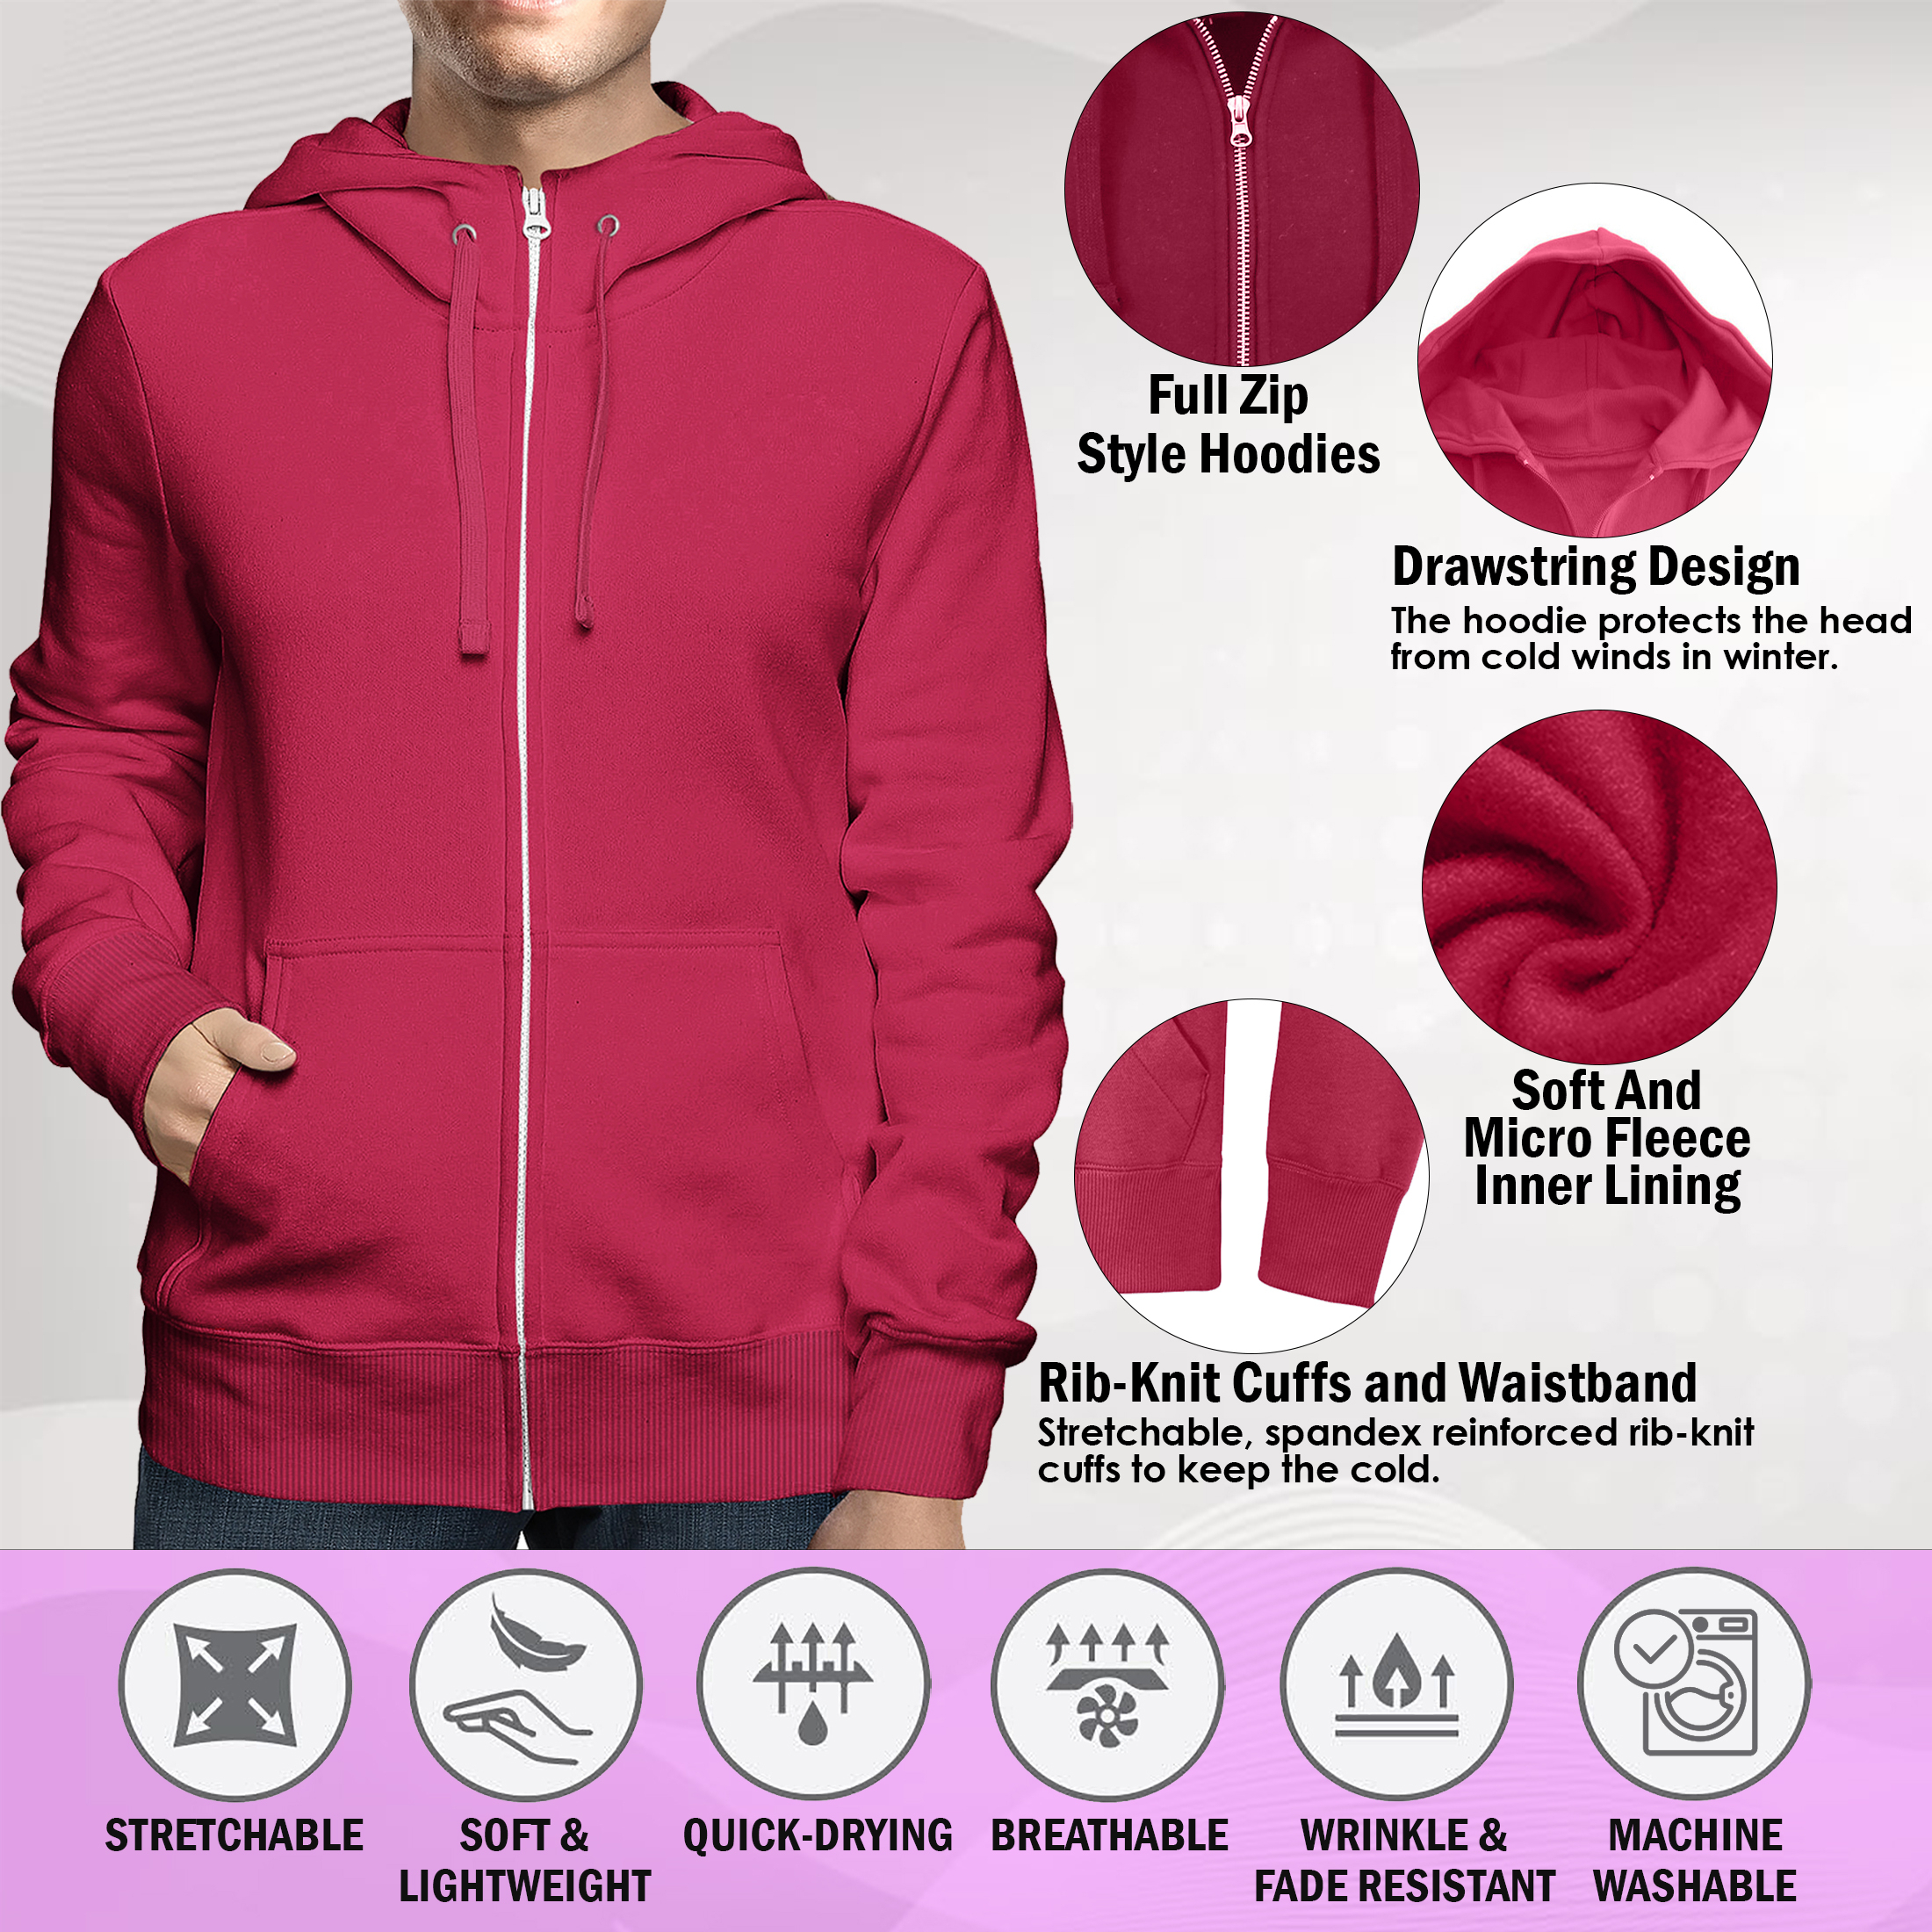 2-Pack: Men's Full Zip Up Fleece-Lined Hoodie Sweatshirt (Big & Tall Size Available) - Burgundy & Timberland, 4x-large